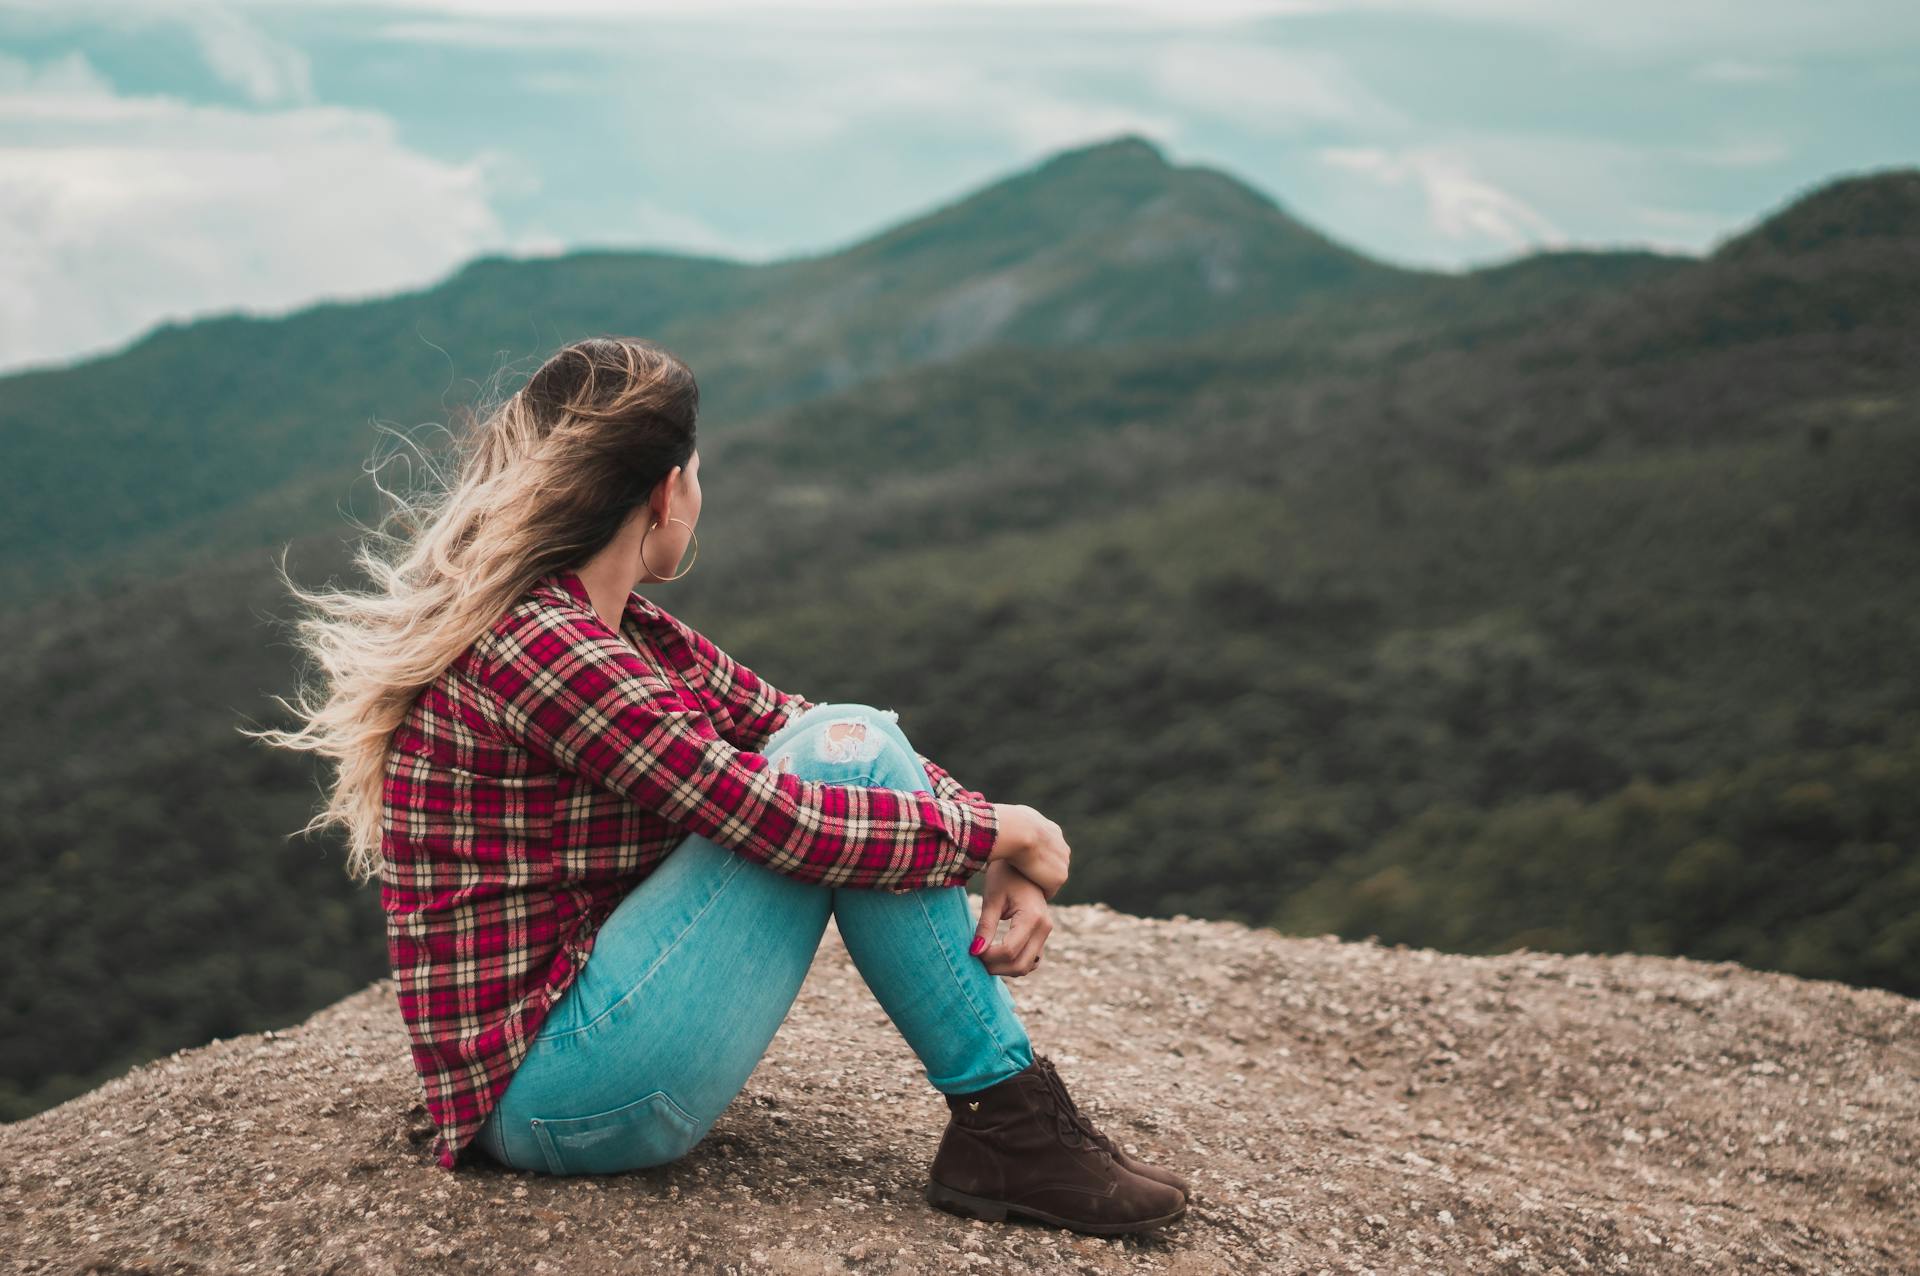 A side view of a woman sitting on the ground overlooking a hill | Source: Pexels